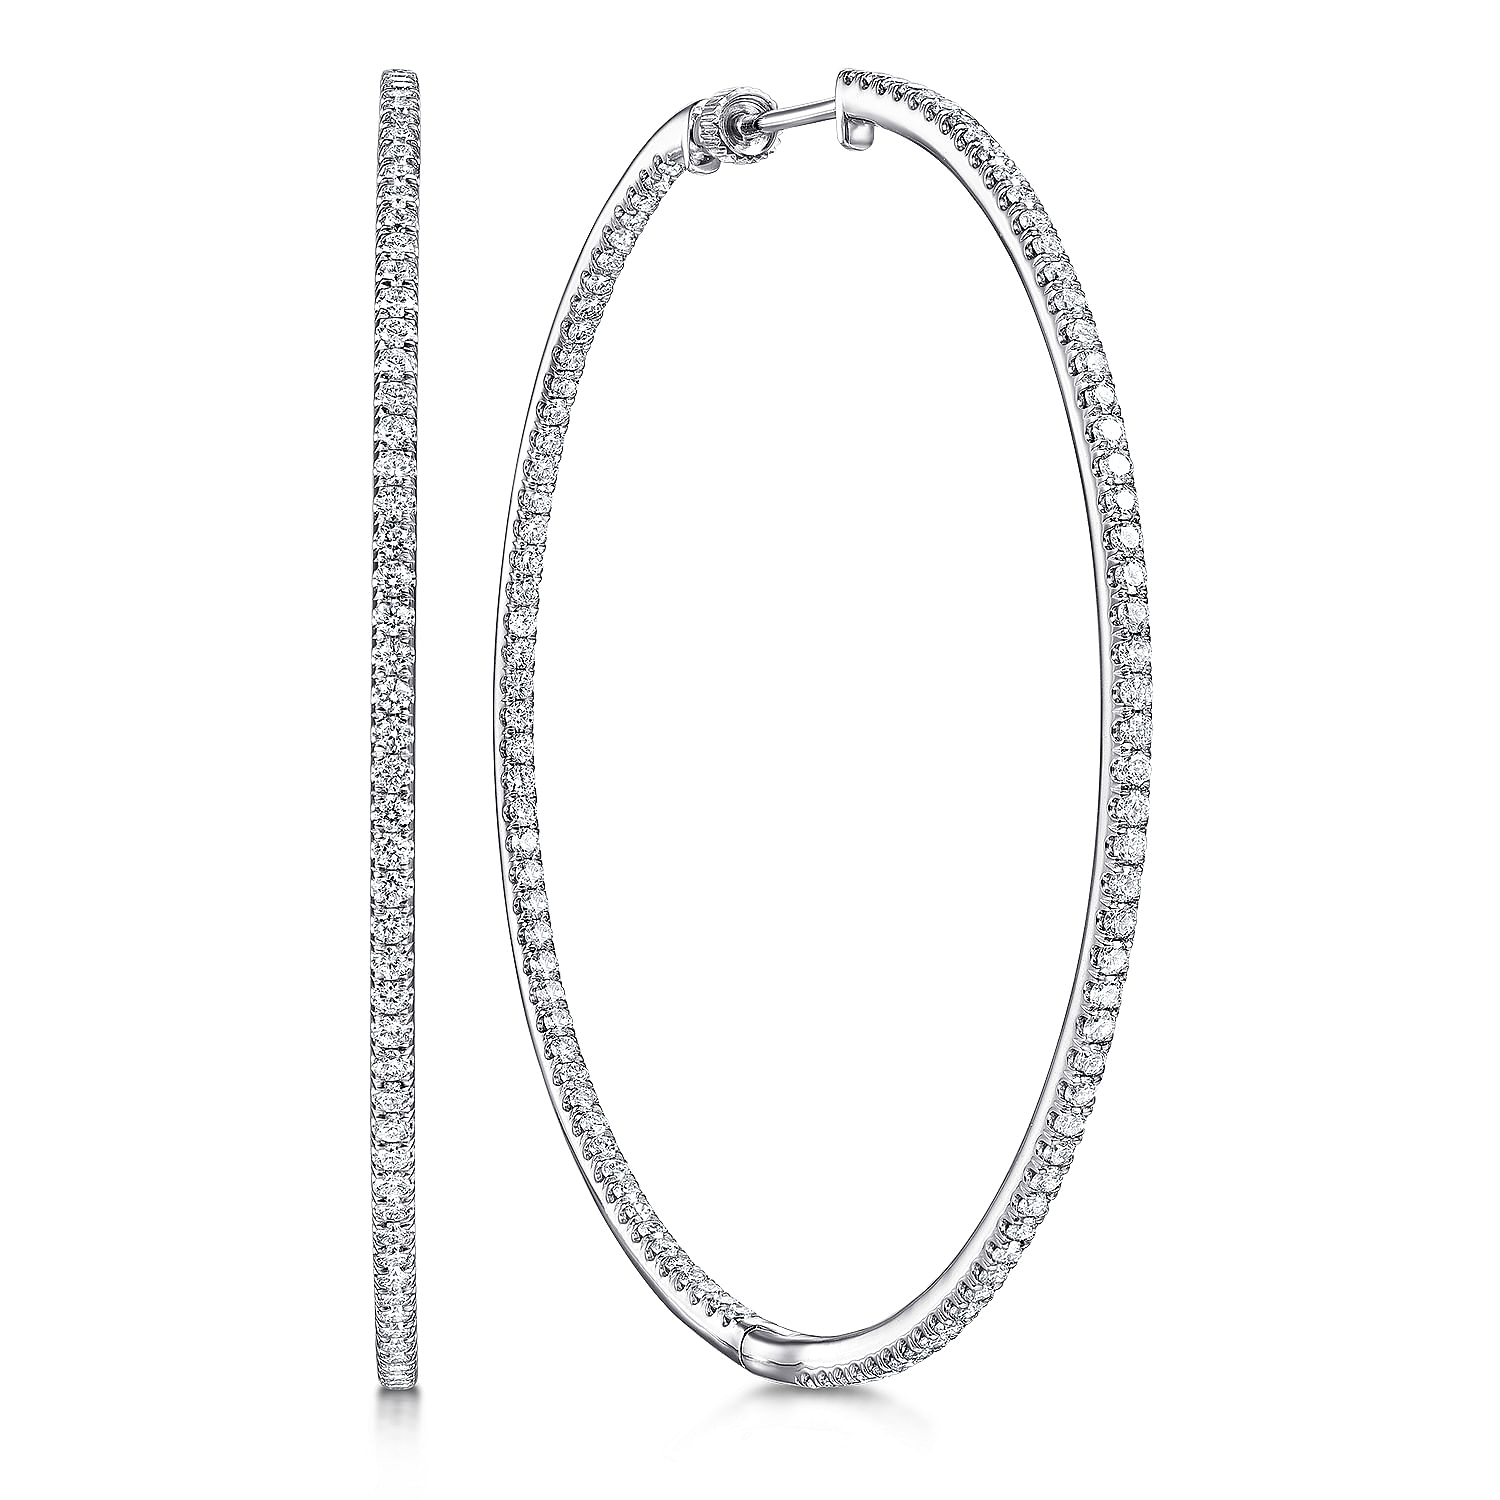 14K White Gold French Pavé 60mm Round Inside Out Diamond Hoop Earrings